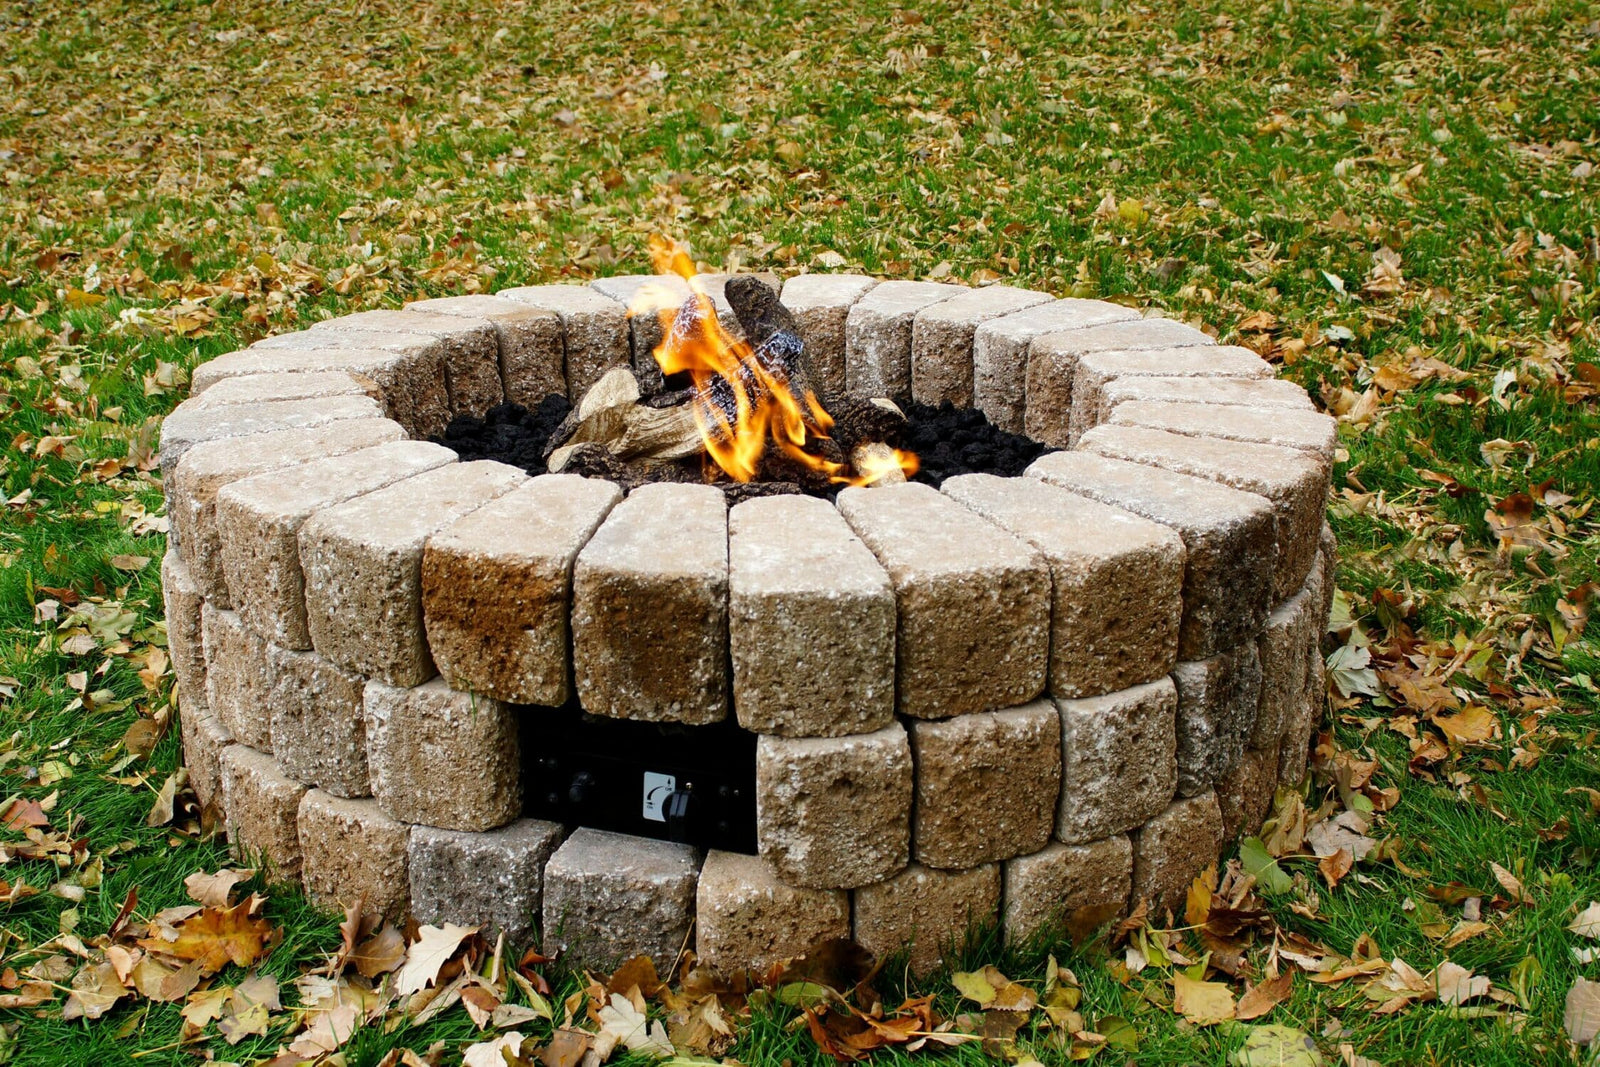 Things to Consider Before You Build a Fire Pit